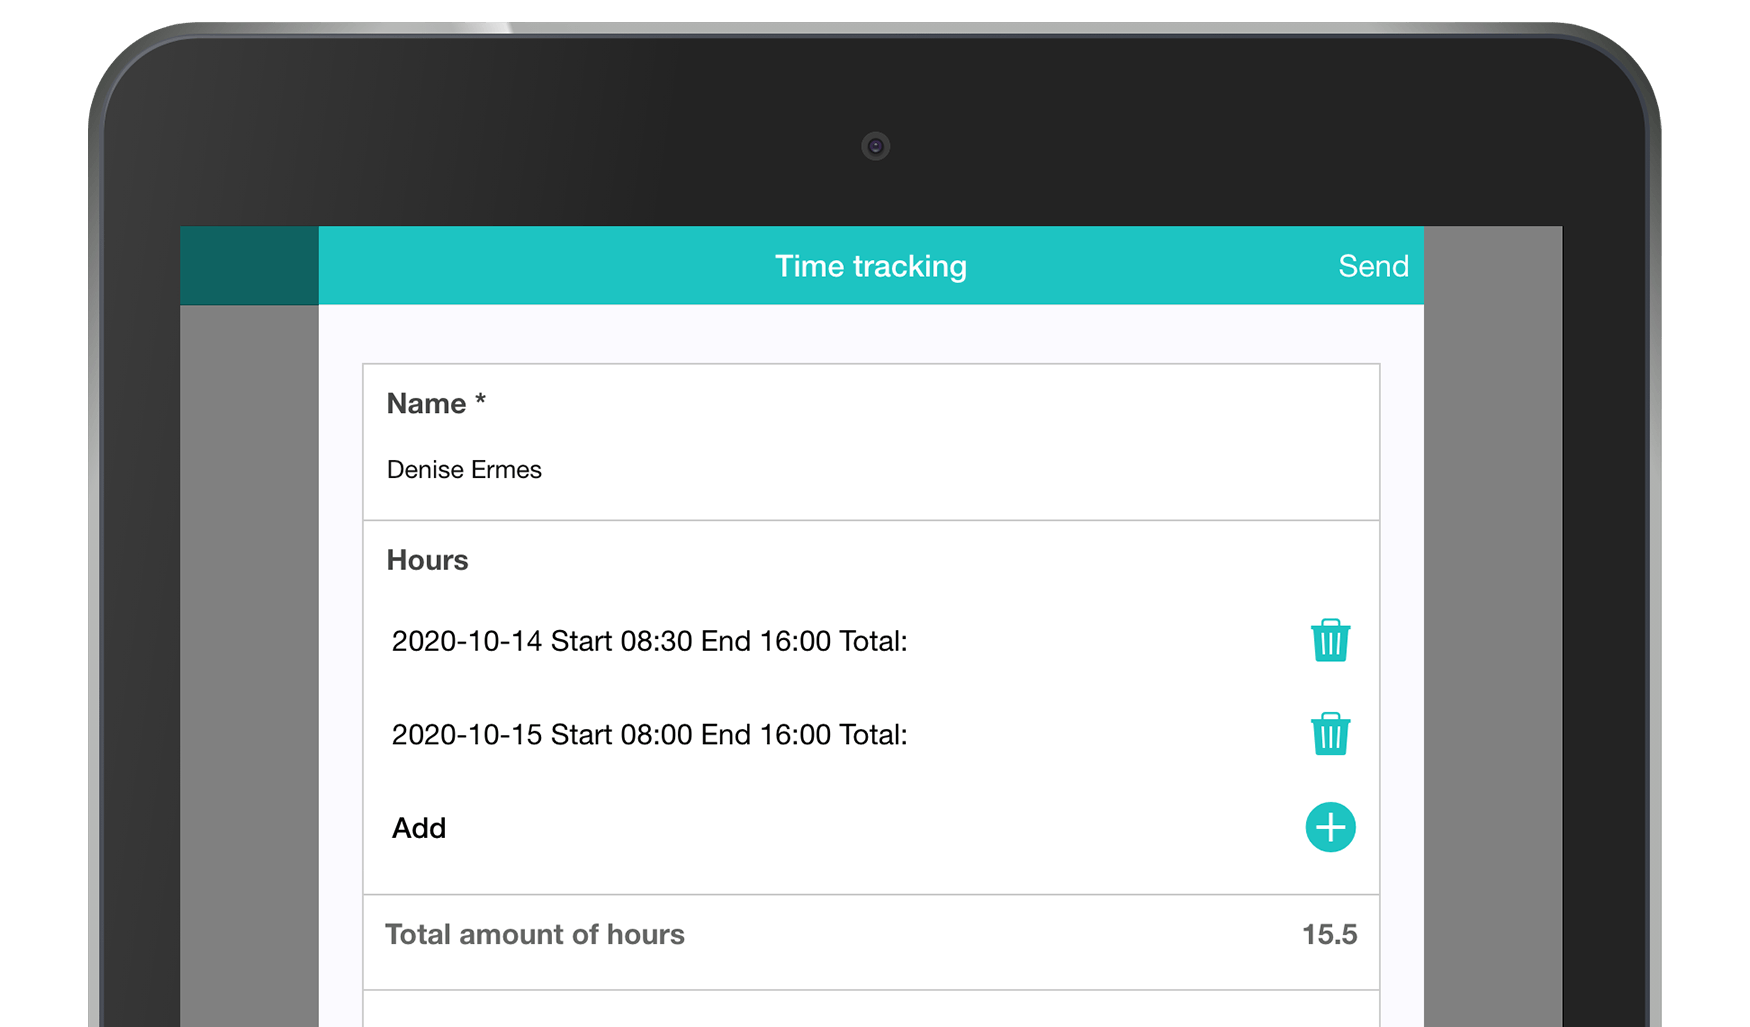 MoreApp Time Tracking form